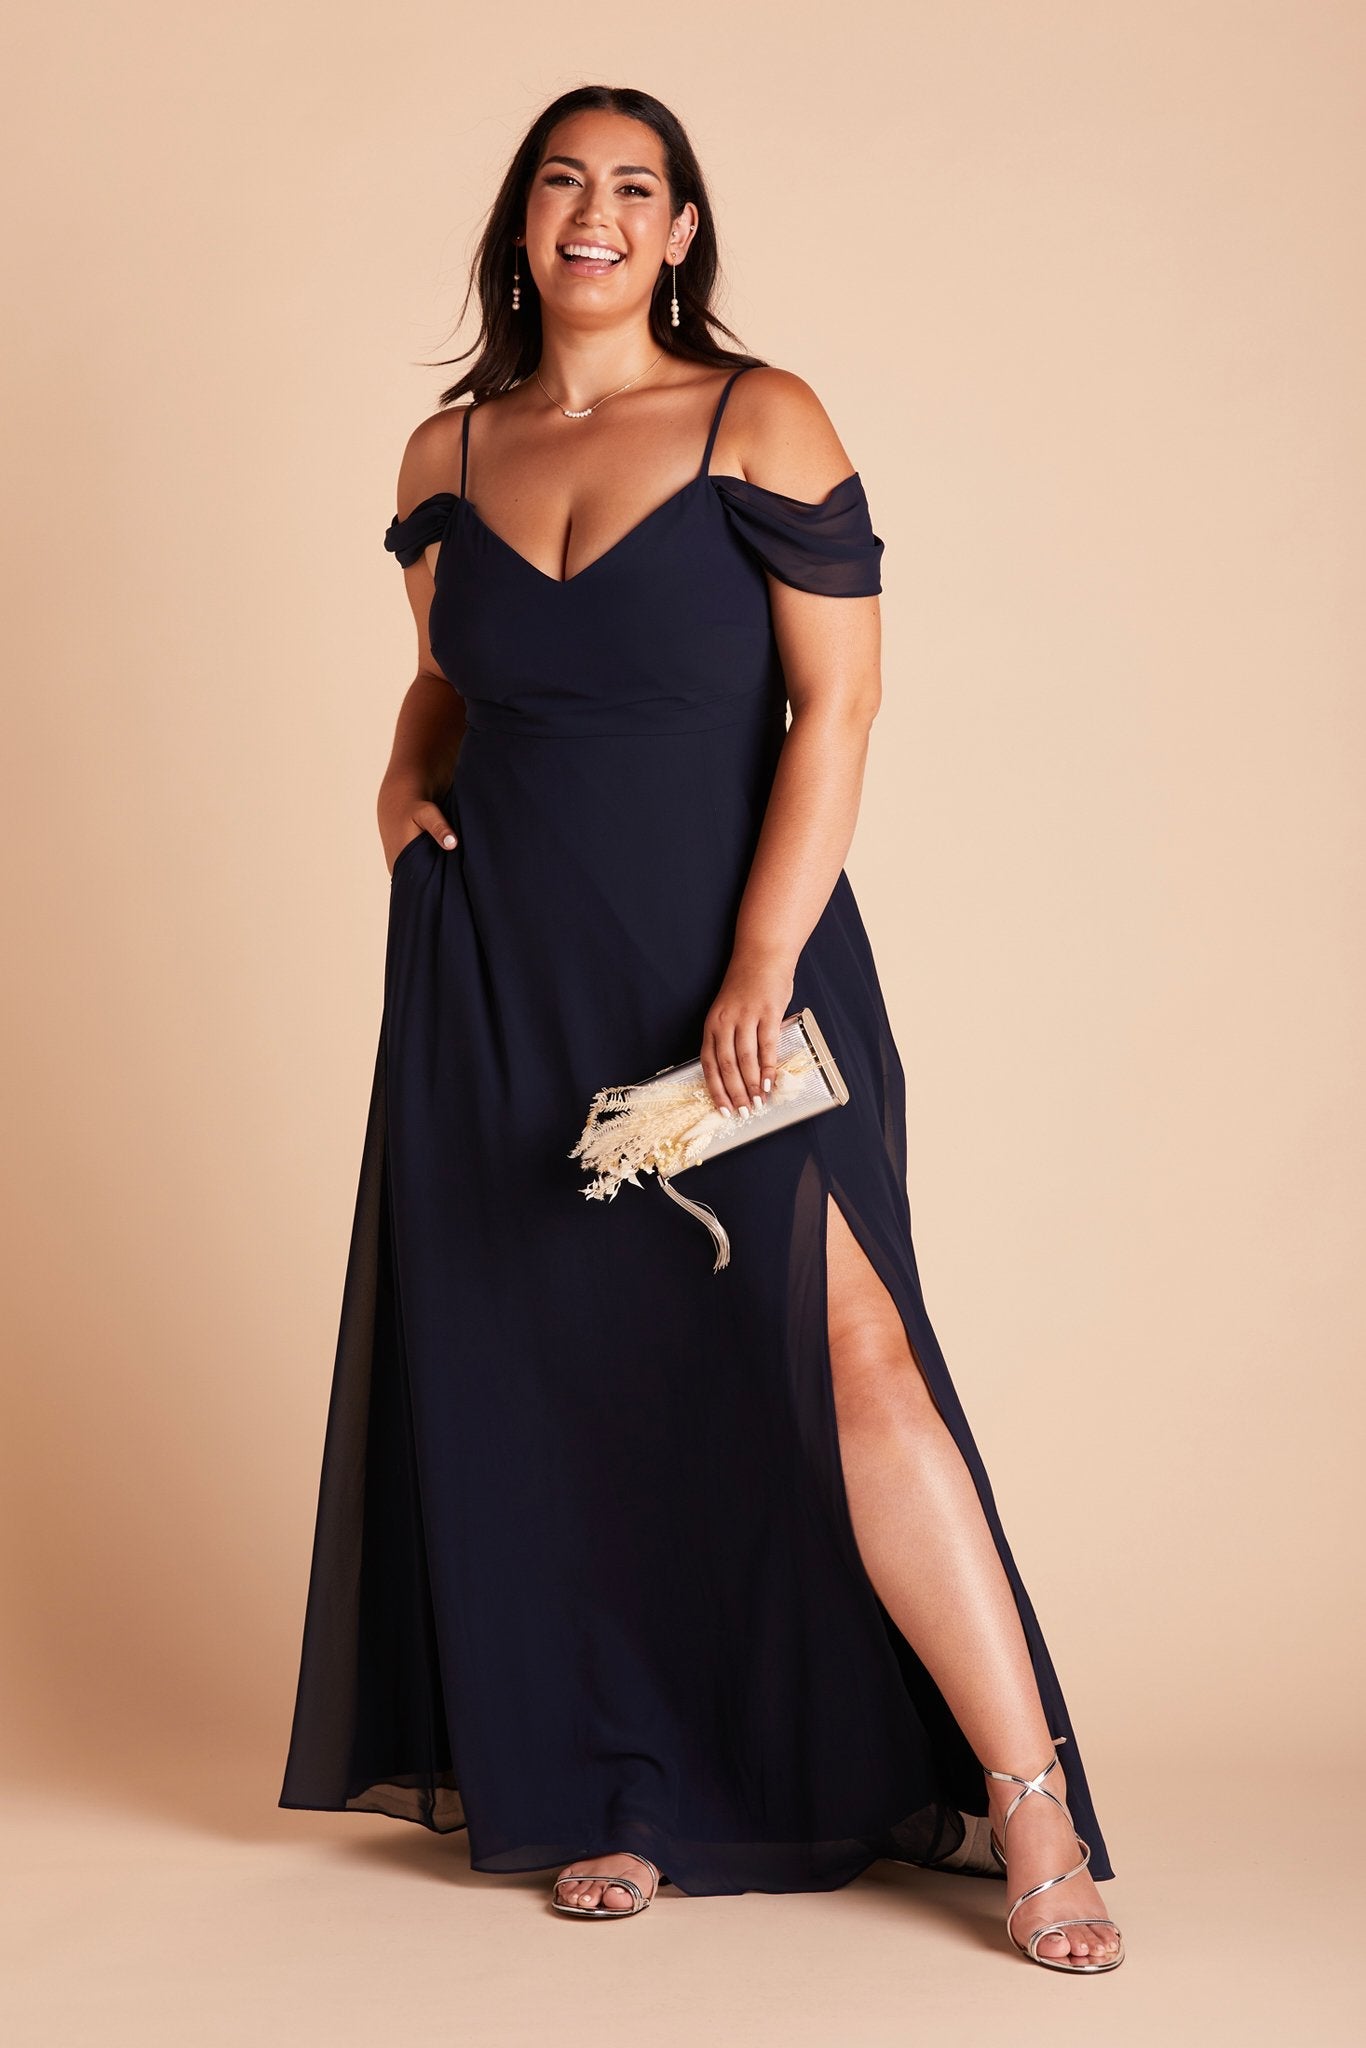 Devin convertible plus size bridesmaids dress with slit in navy blue chiffon by Birdy Grey, front view with hand in pocket